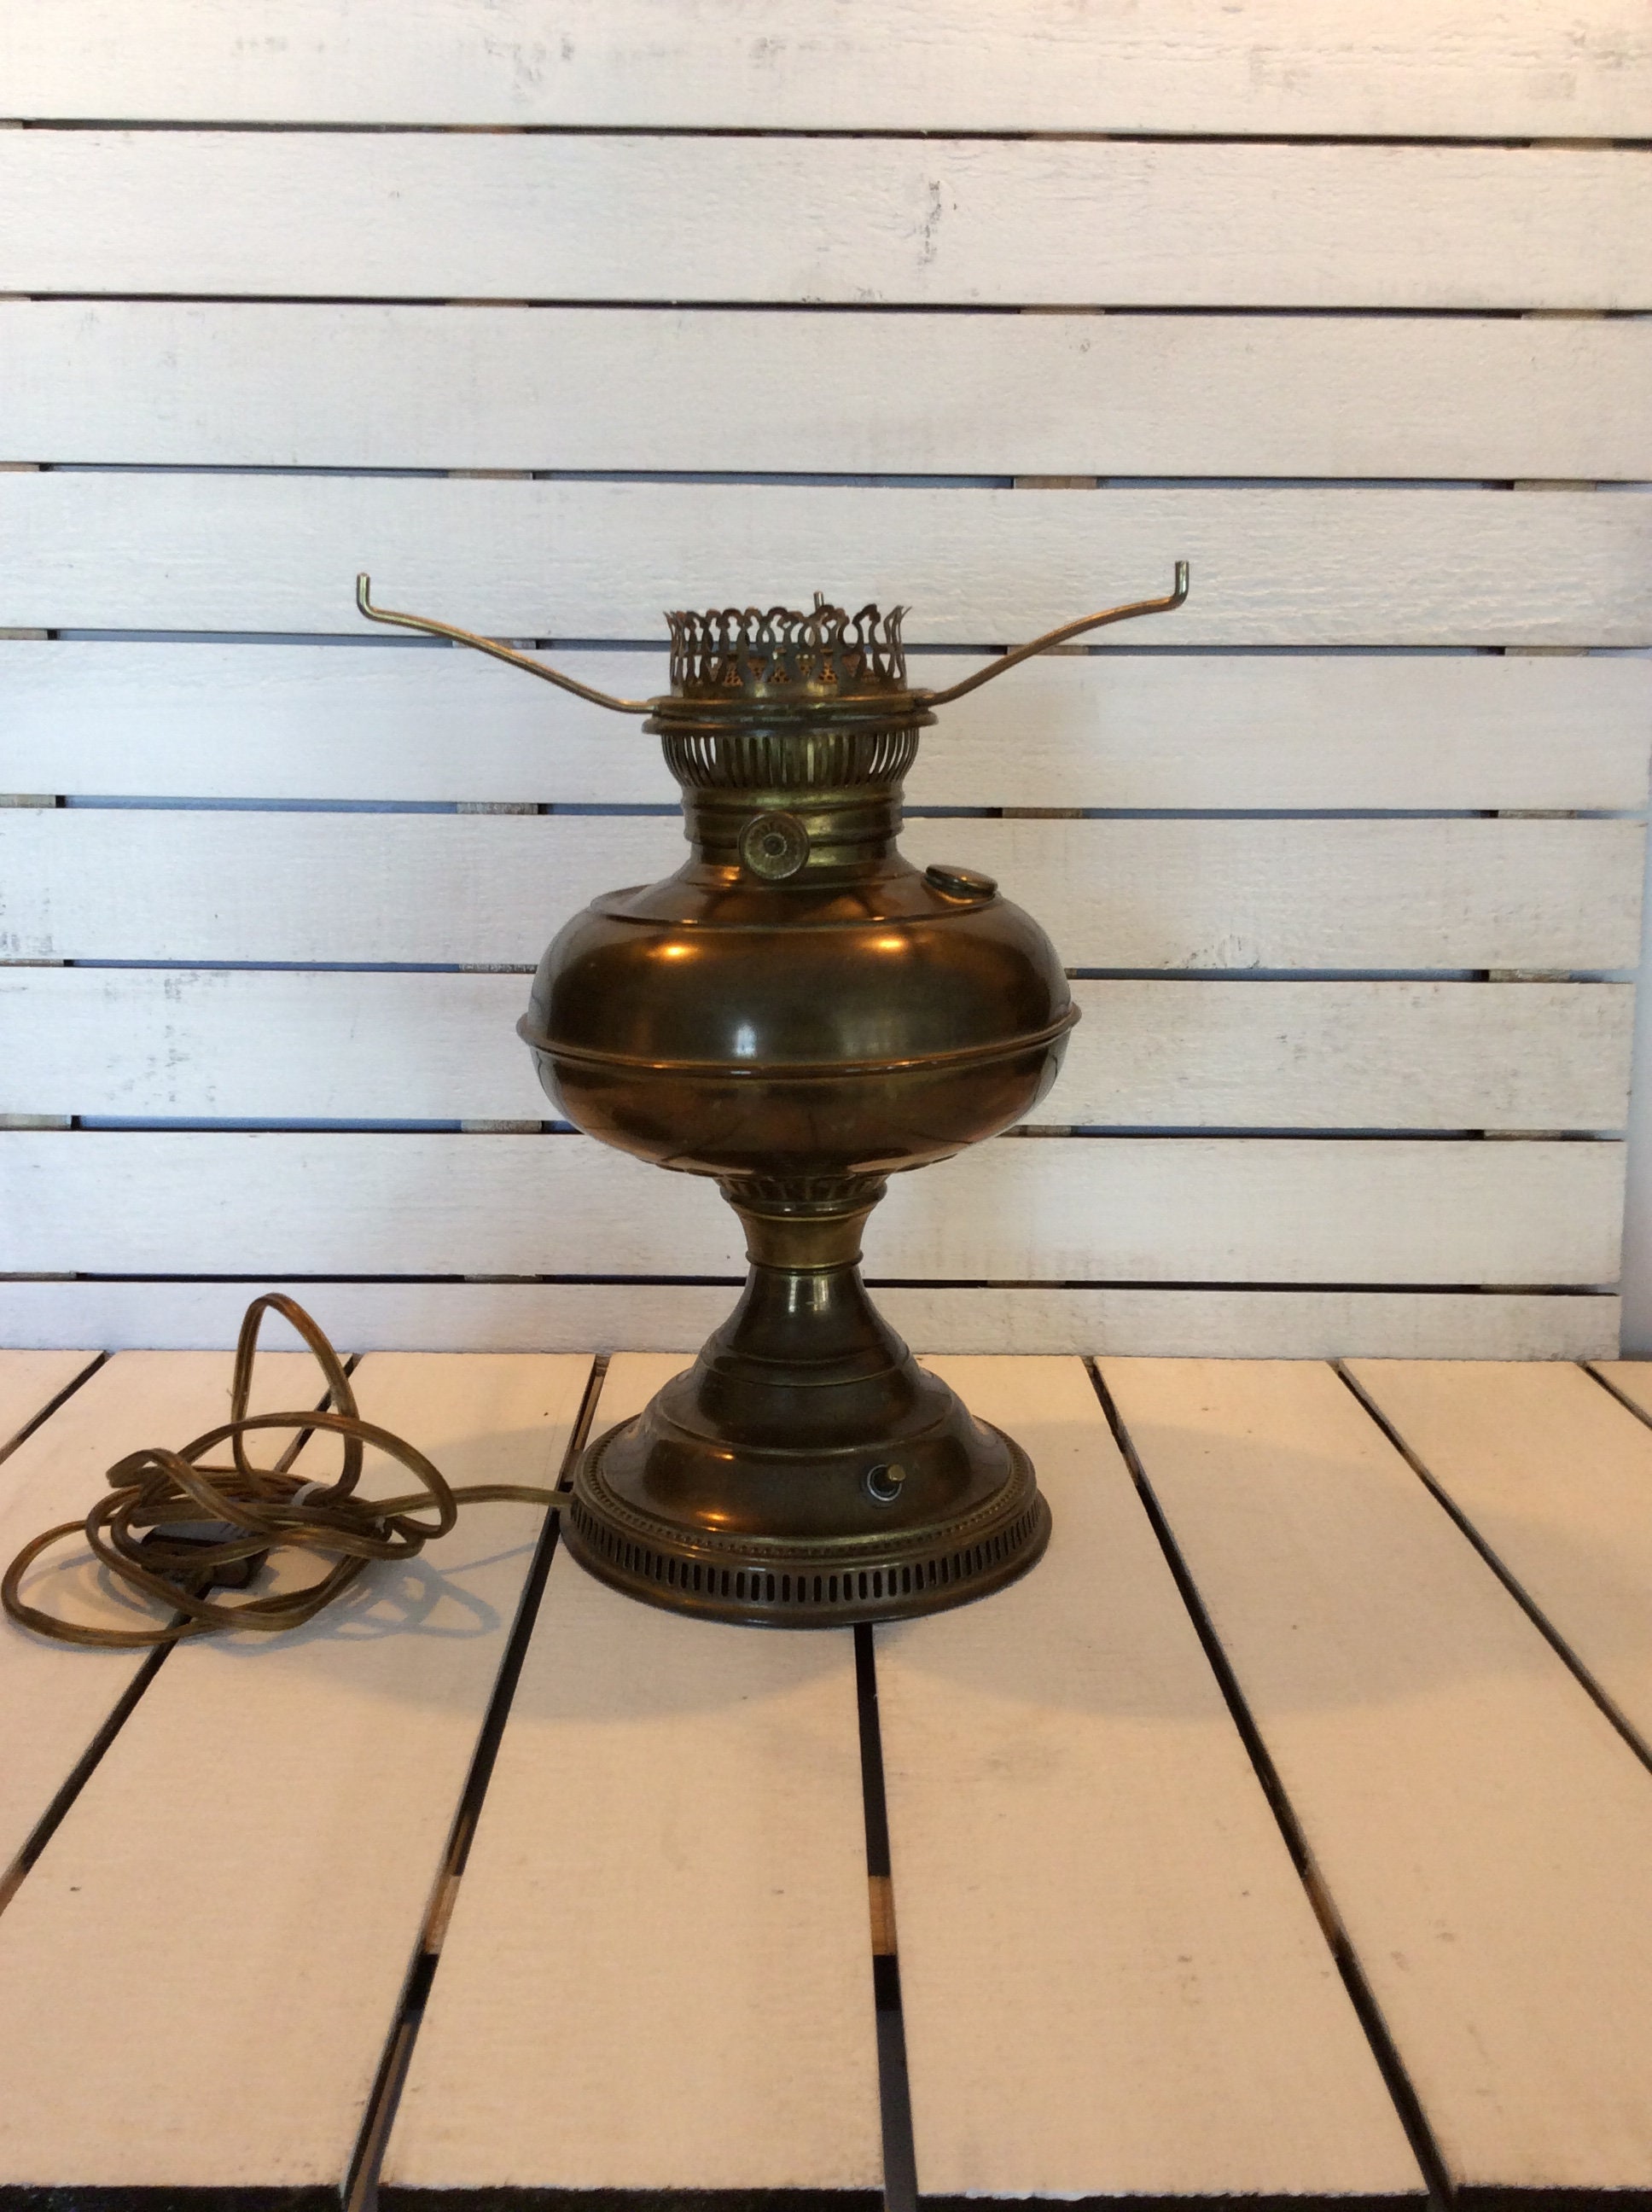 Antique Kosmos-brenner Rayo No. 2 Oil Lamp Converted to Electric